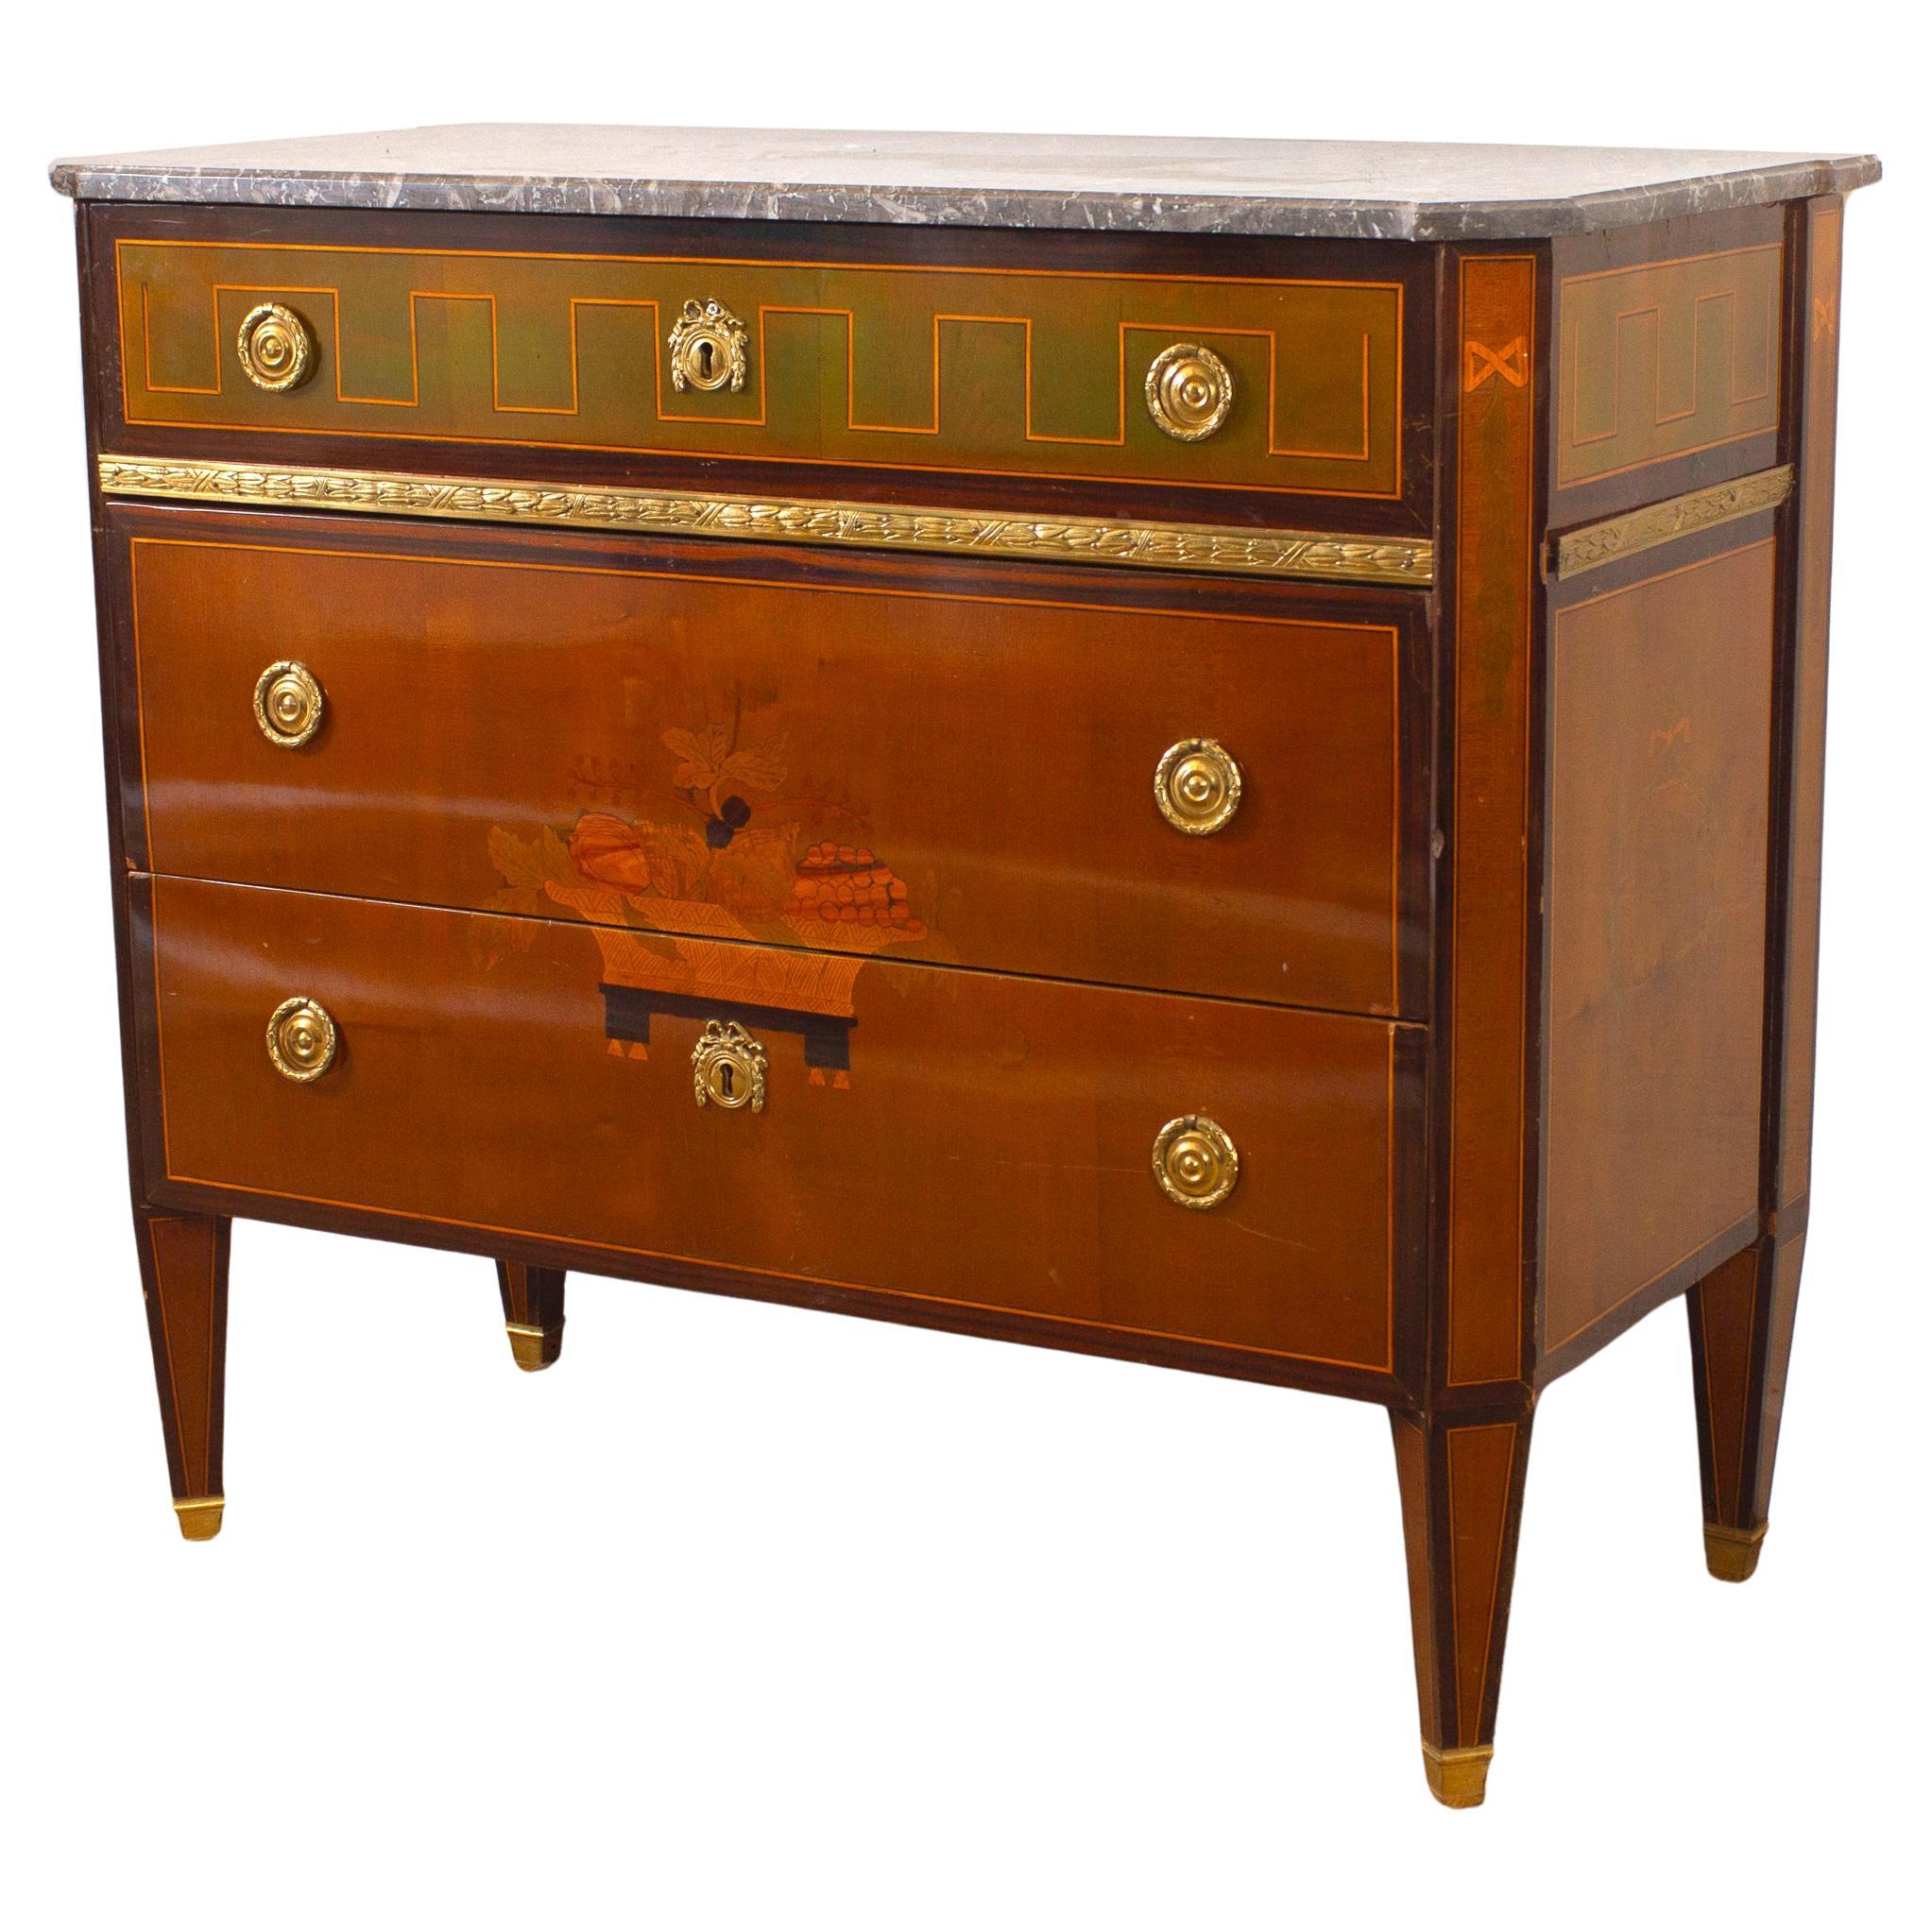 Elegant French 18th Century Commode Louis XVI Period For Sale